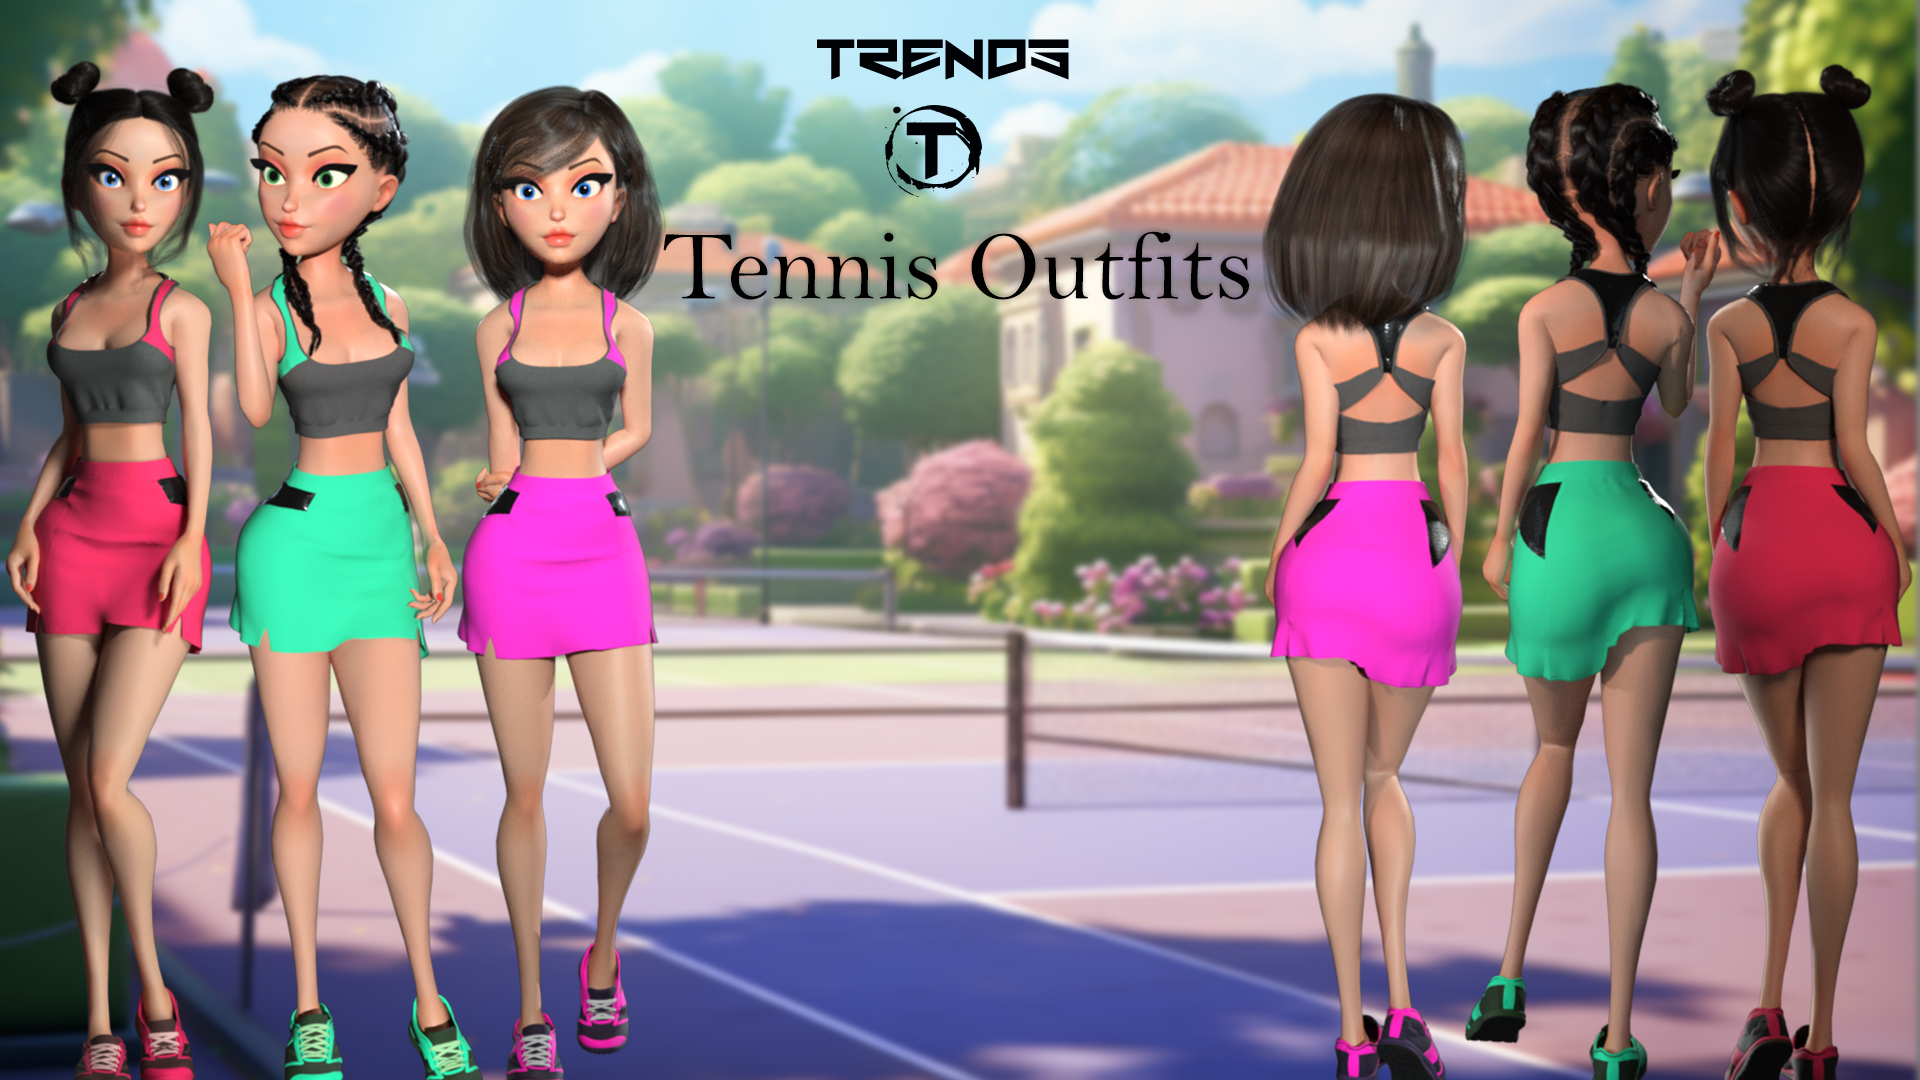 Yvonne's Tennis Outfits